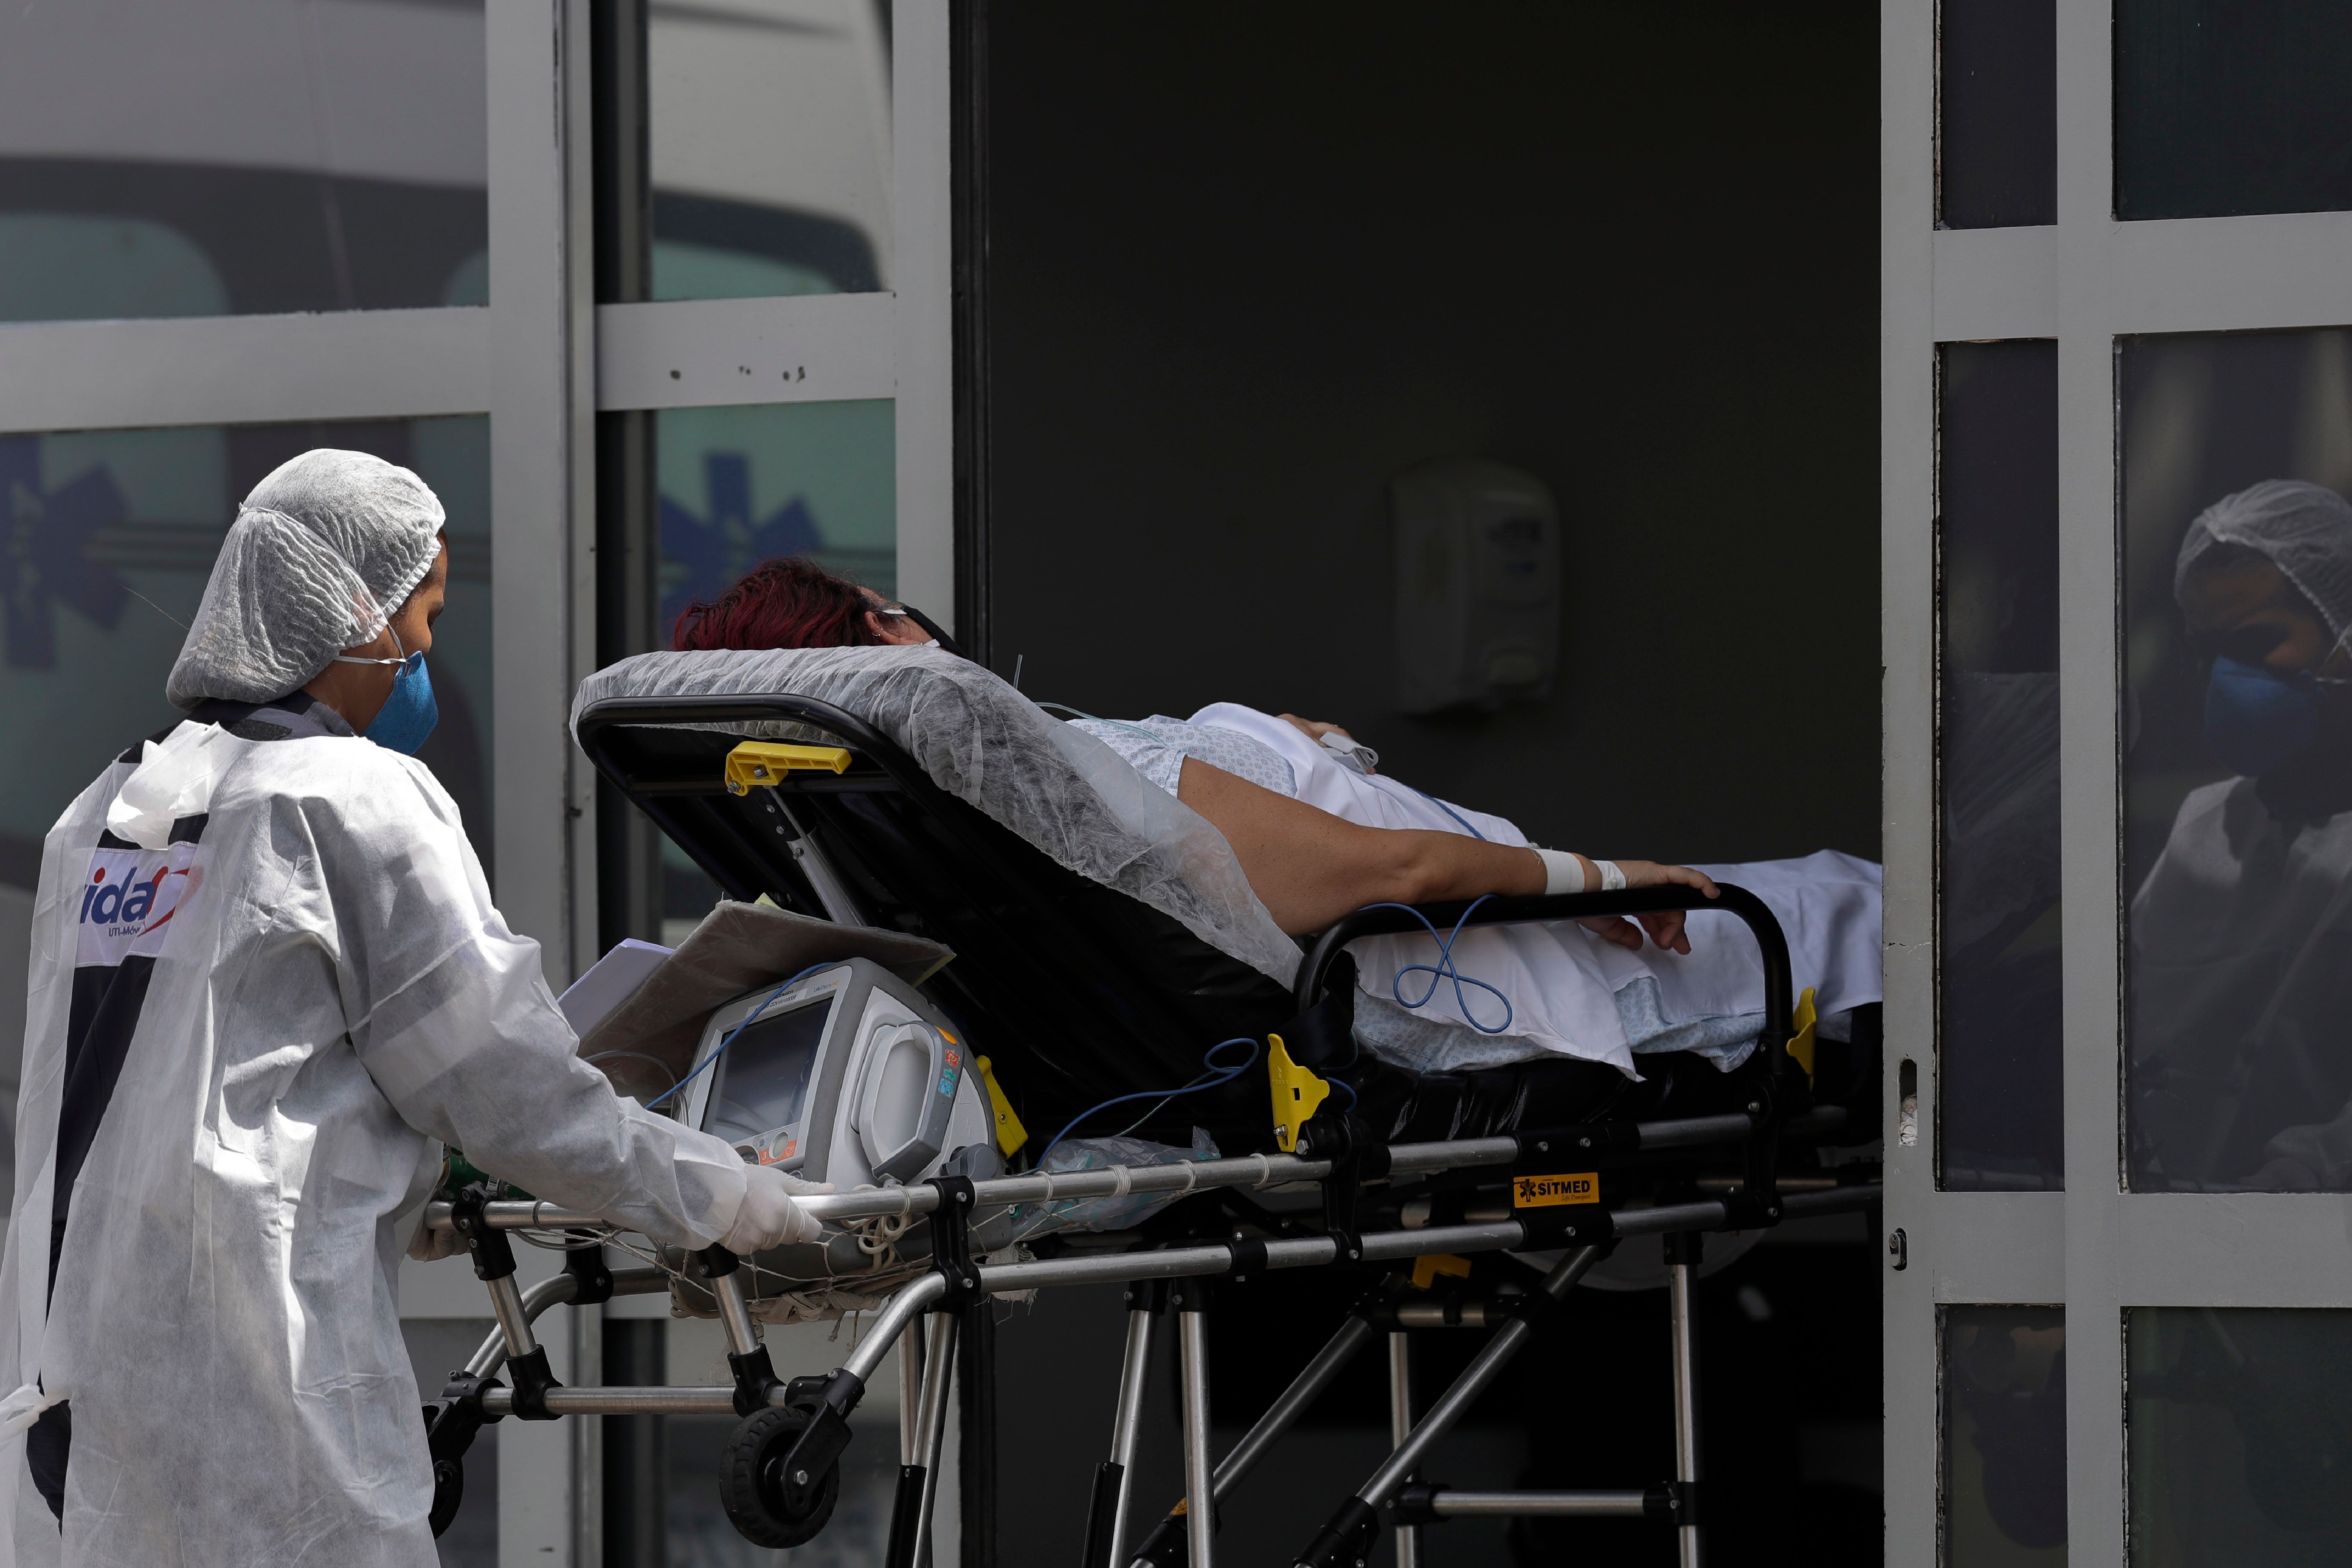 A healthcare worker pushes a patient suspected of having COVID-19 from an ambulance into the HRAN public hospital in Brasilia